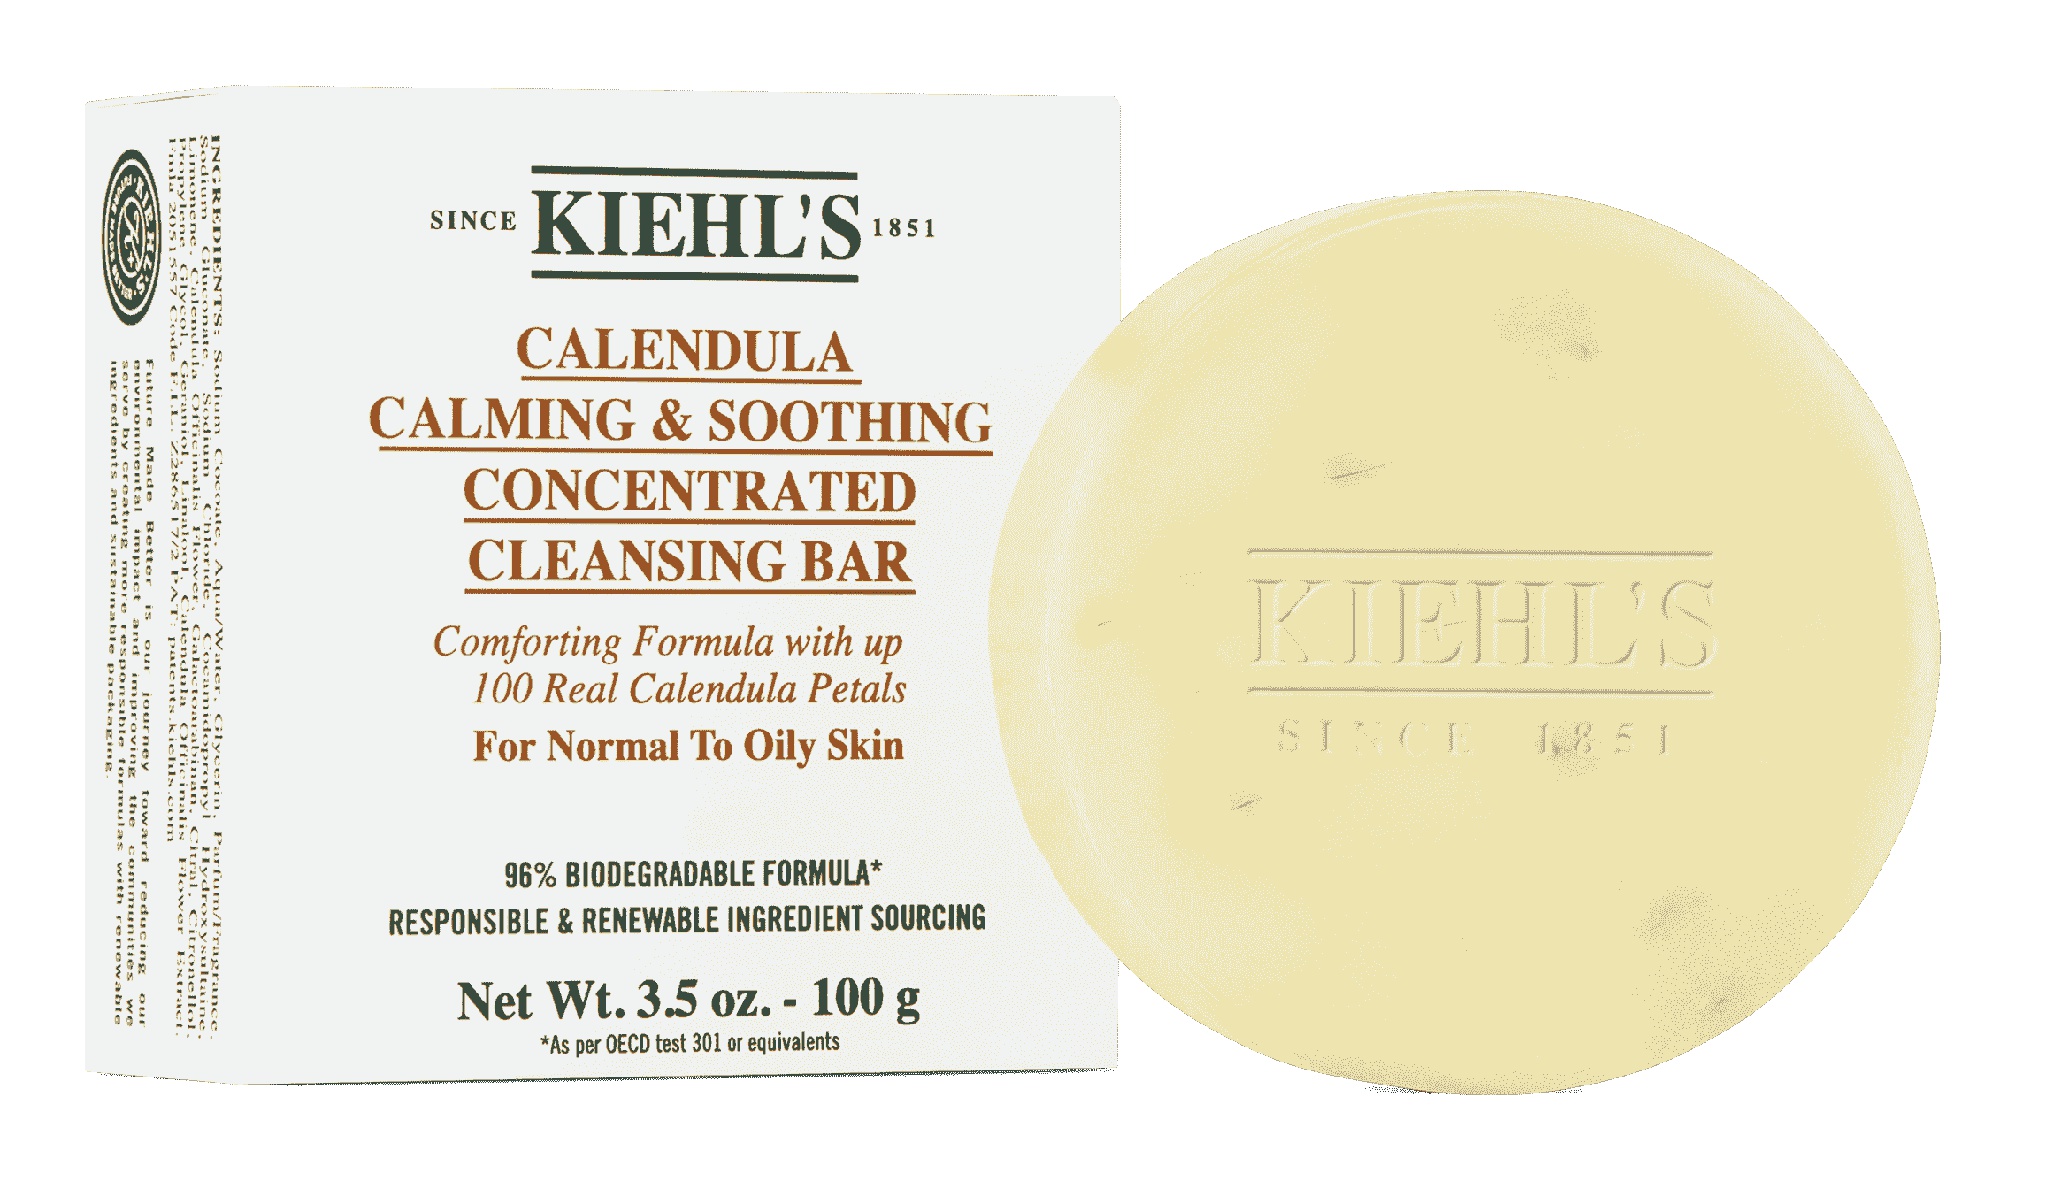 Kiehl’s Calendula Calming & Soothing Concentrated Cleansing Bar